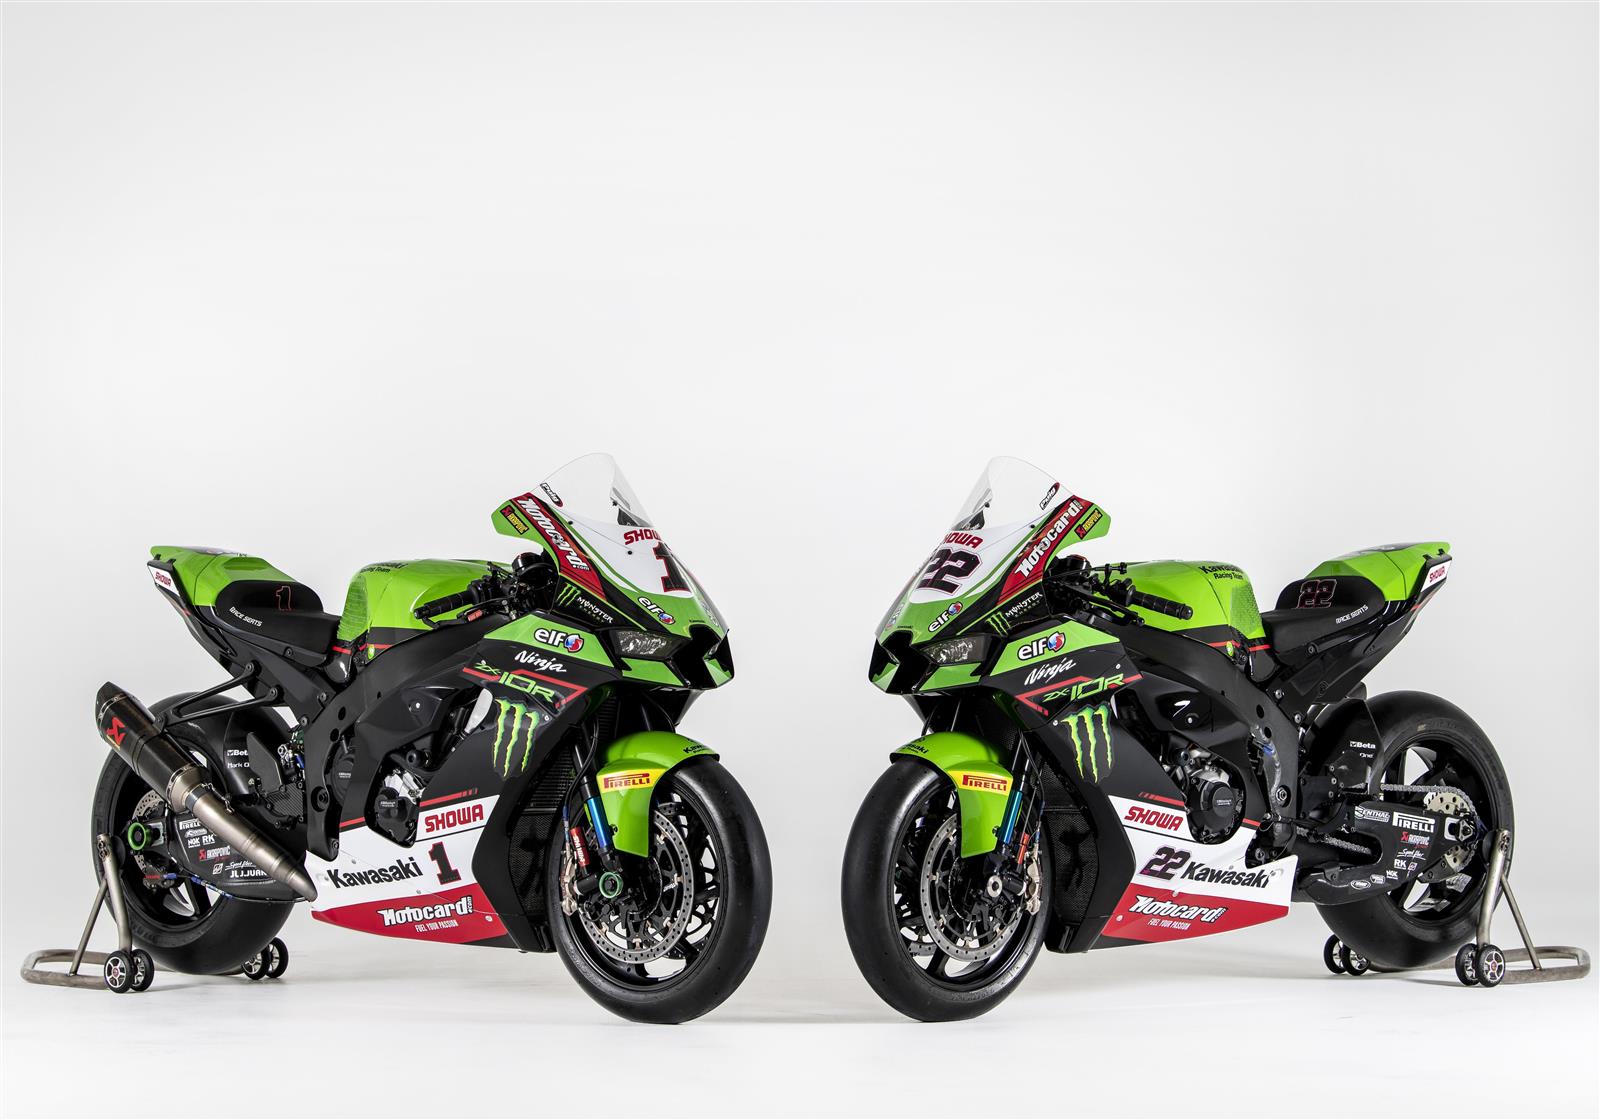 Formode Skim virkningsfuldhed Newsletter The official race report service of Kawasaki Racing Team.  Newsletter kawasaki Fill in the following fields to subscribe to Kawasaki  Newsletter. By submitting your data, you agree with the Kawasaki's privacy  policy and confirm you have read and ...